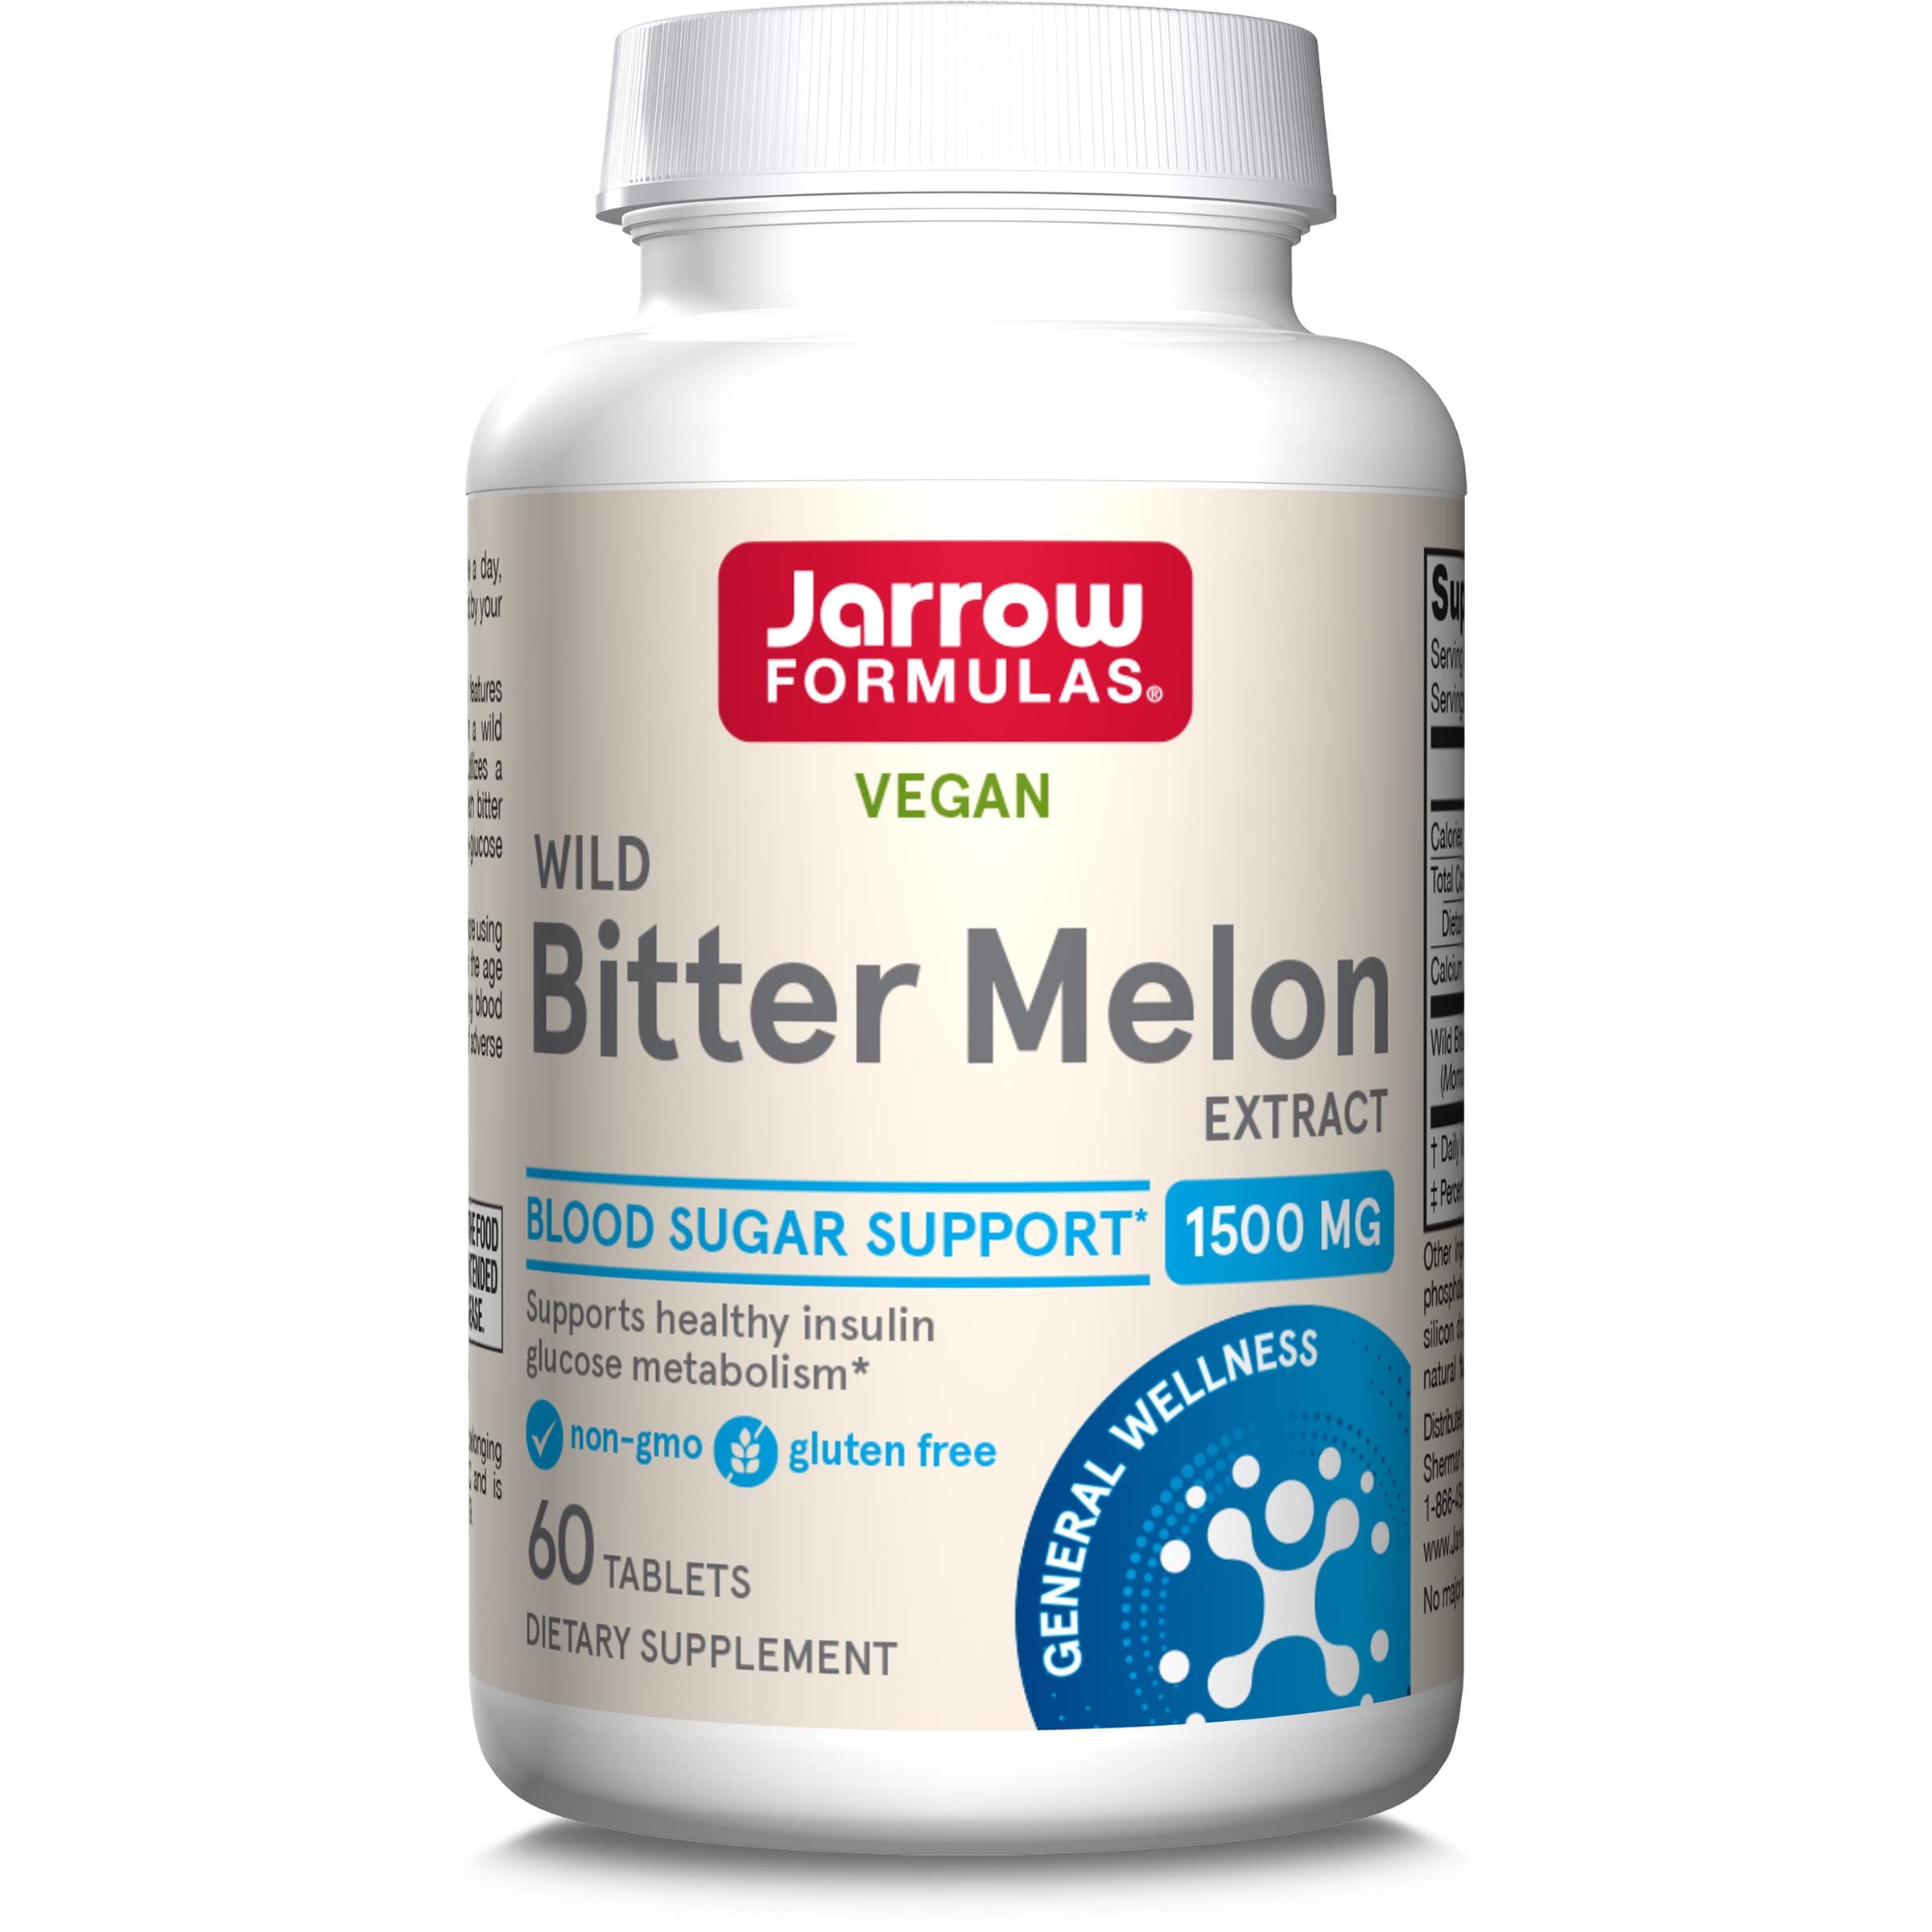 Book Cover Jarrow Formulas Wild Bitter Melon Extract 1500 mg - 60 Tablets - Patented & Clinically Tested - Dietary Supplement Supports Insulin-Glucose Metabolism - 30 Servings 60 Count (Pack of 1)